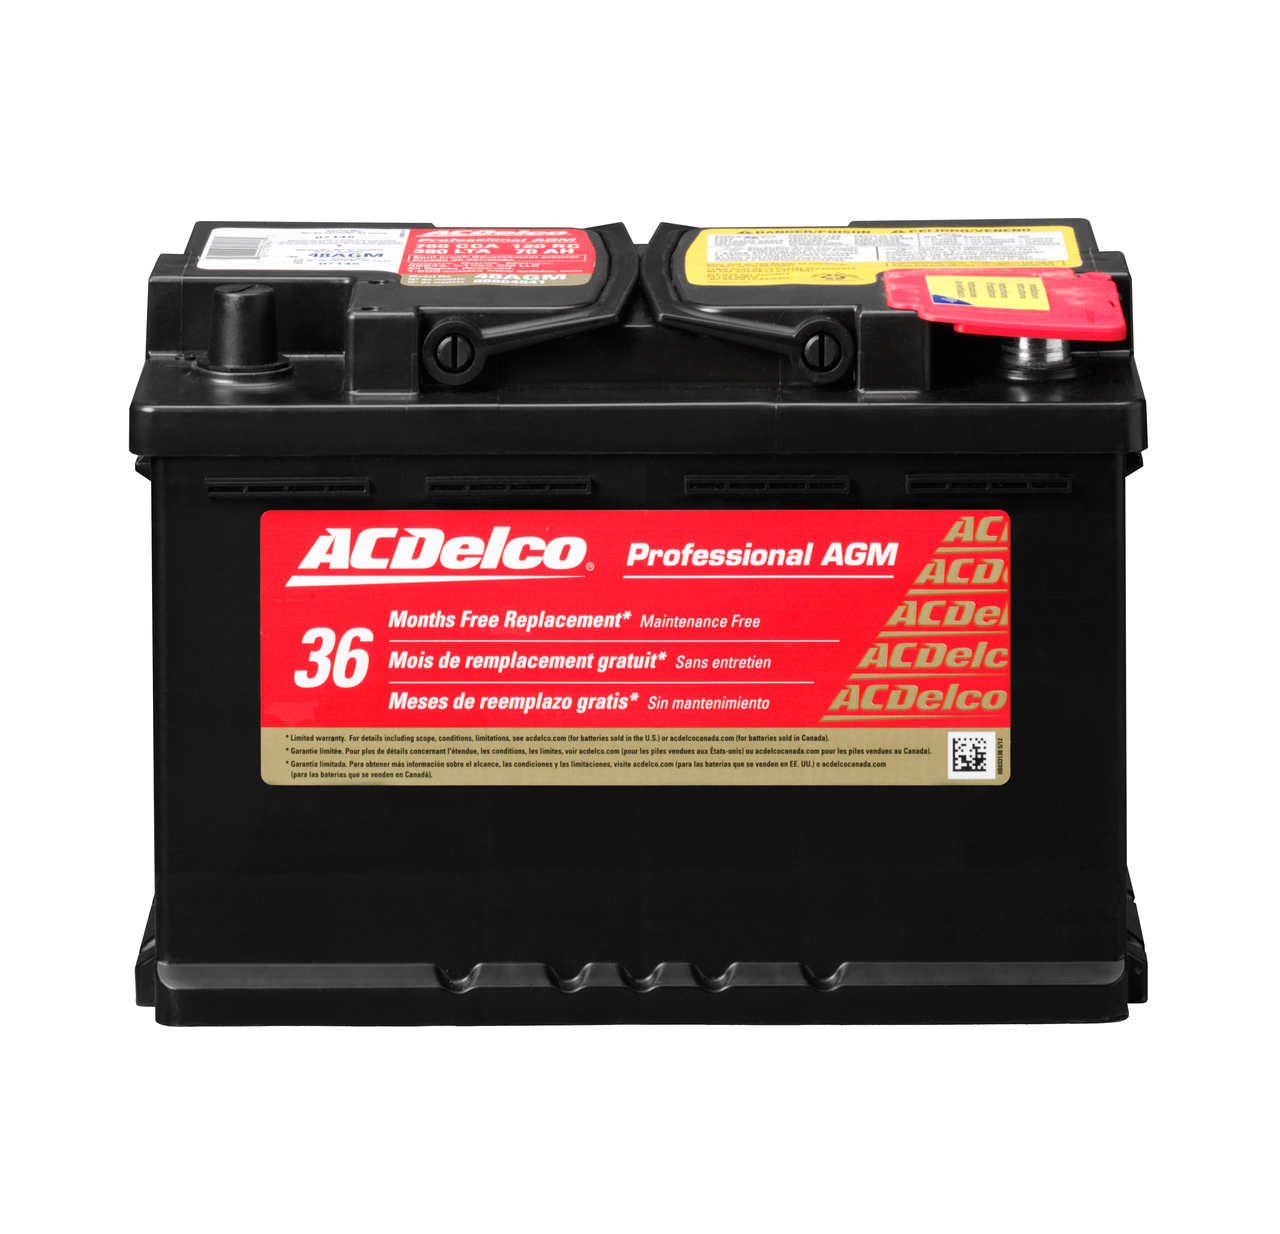 pulver Kritisk damp 2016 Volvo S80 Battery - ACDelco 48AGM